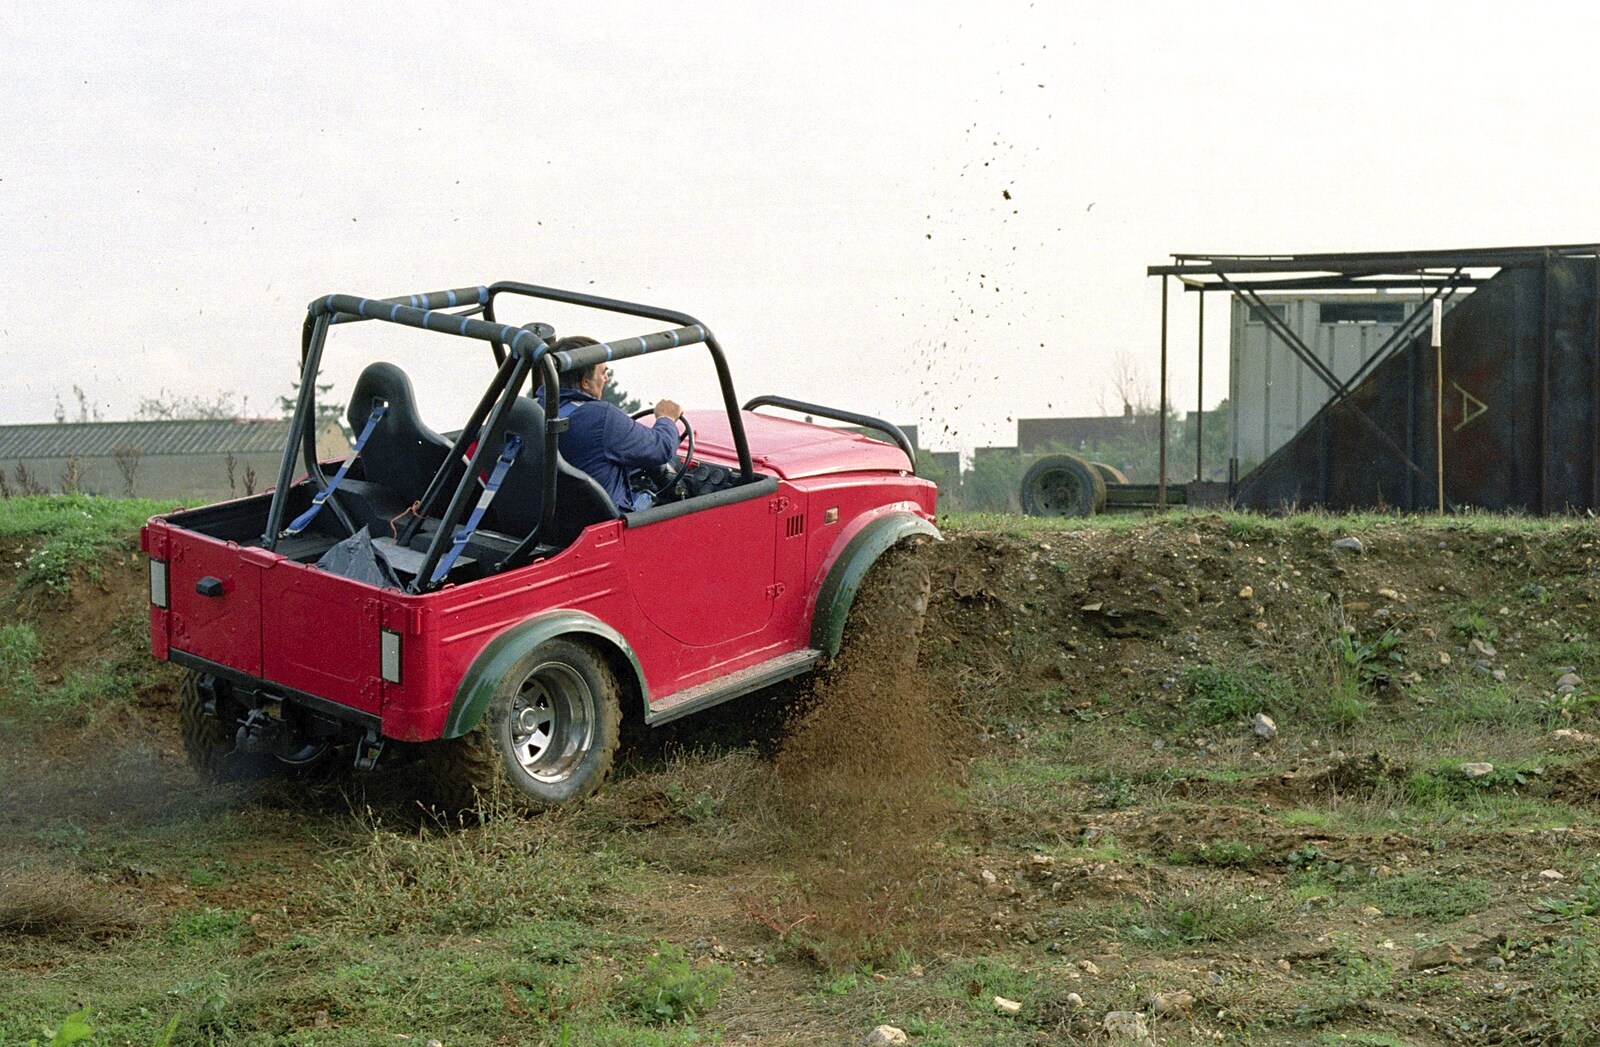 There's a spray of mud from Off-roading with Geoff and Brenda, Stuston and Elsewhere, Suffolk - 15th September 1995